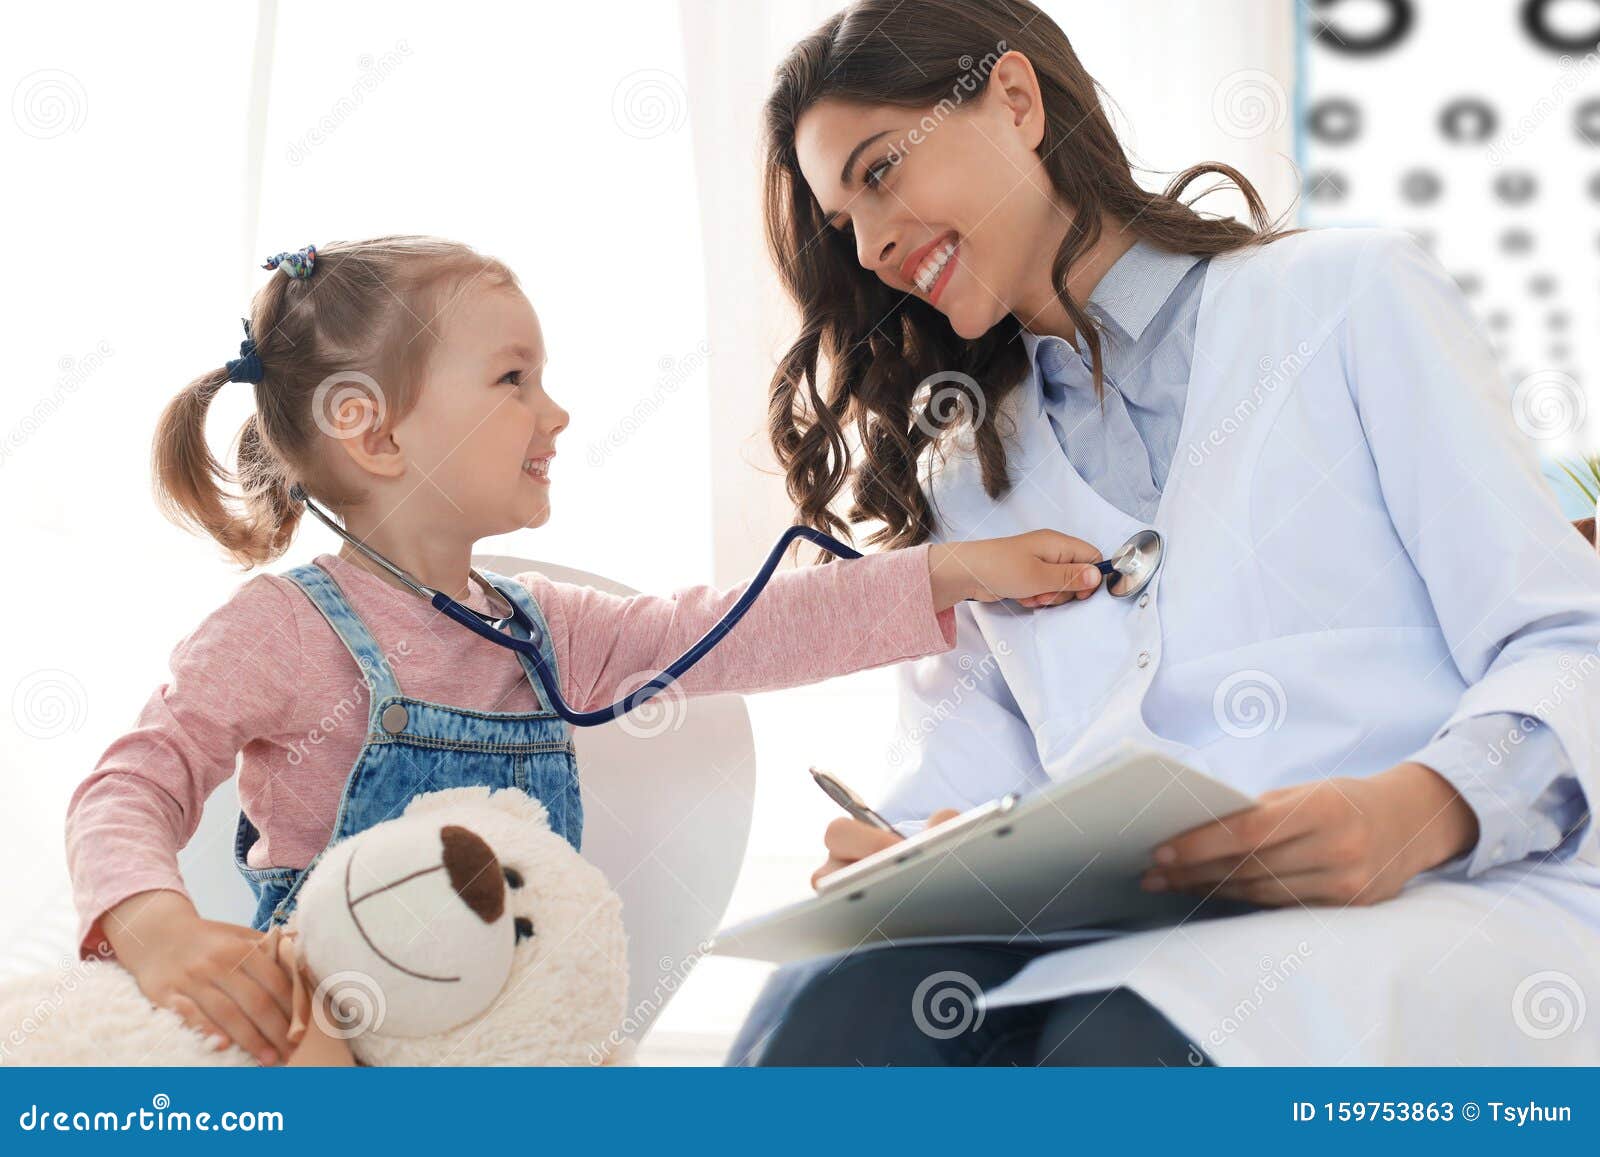 little girl at the doctor for a checkup. child auscultate the heartbeat of the doctor.